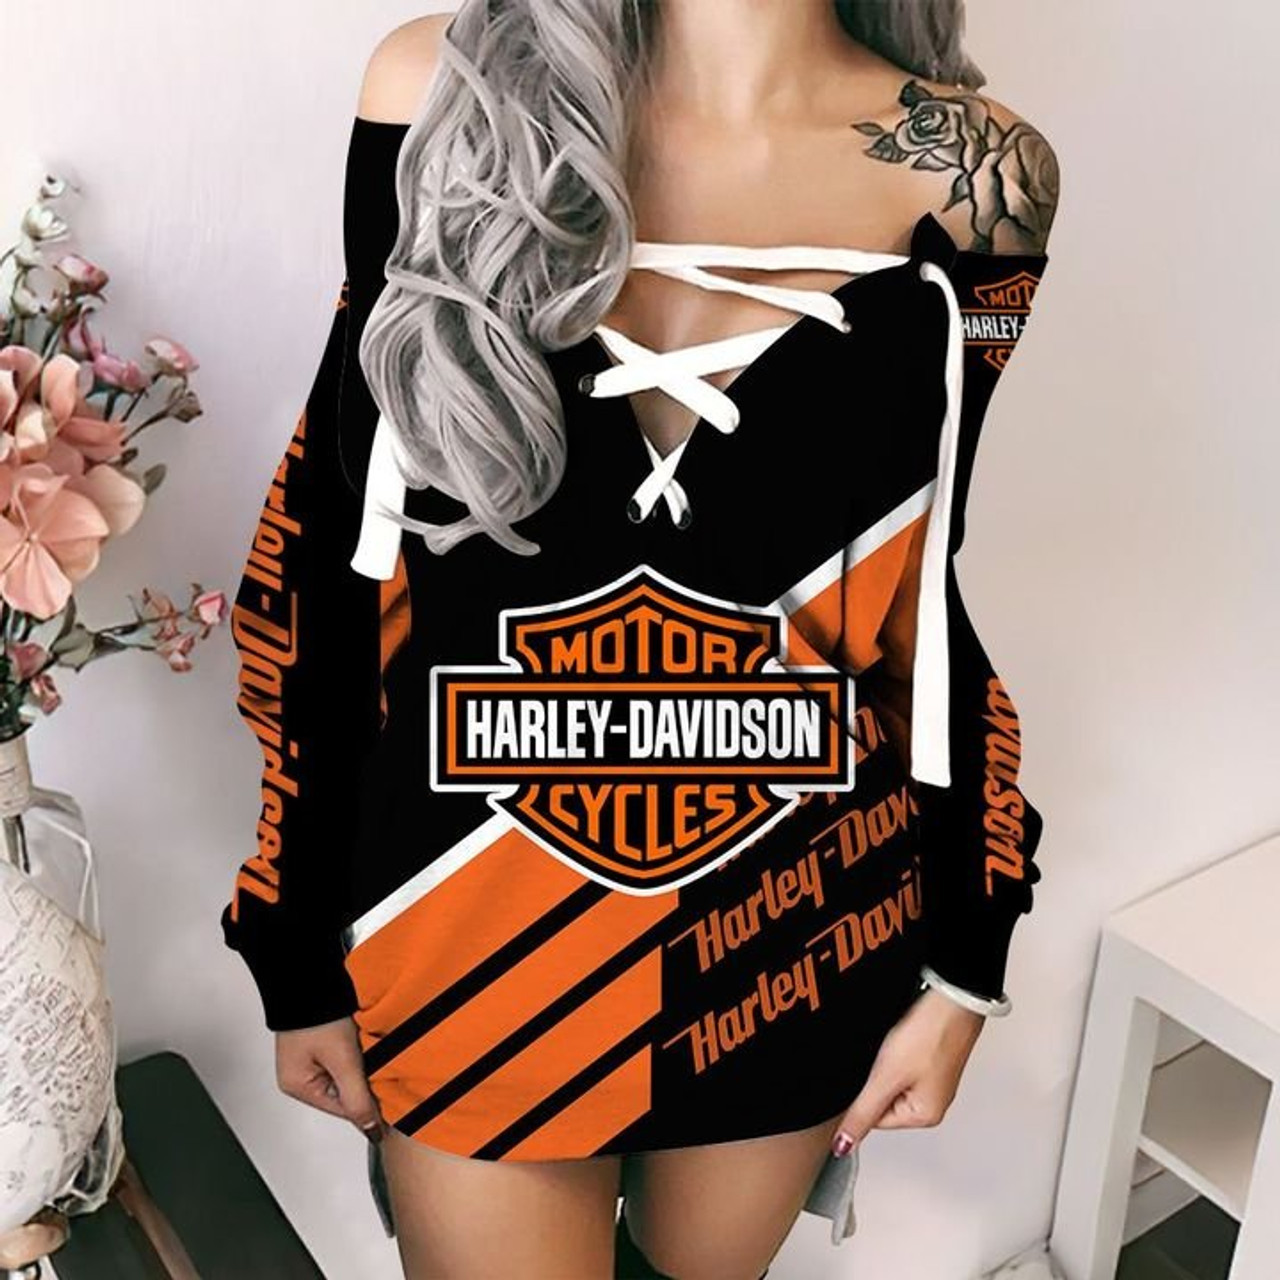 HARLEY-DAVIDSON-MOTORCYCLE-LADIES-WHITE LACE-UP-DRESS/IN-OFFICIAL-CLASSIC-HARLEY-BLACK & ORANGE COLORS/OFFICIAL BIG HARLEY DAVIDSON 3D LOGOS..